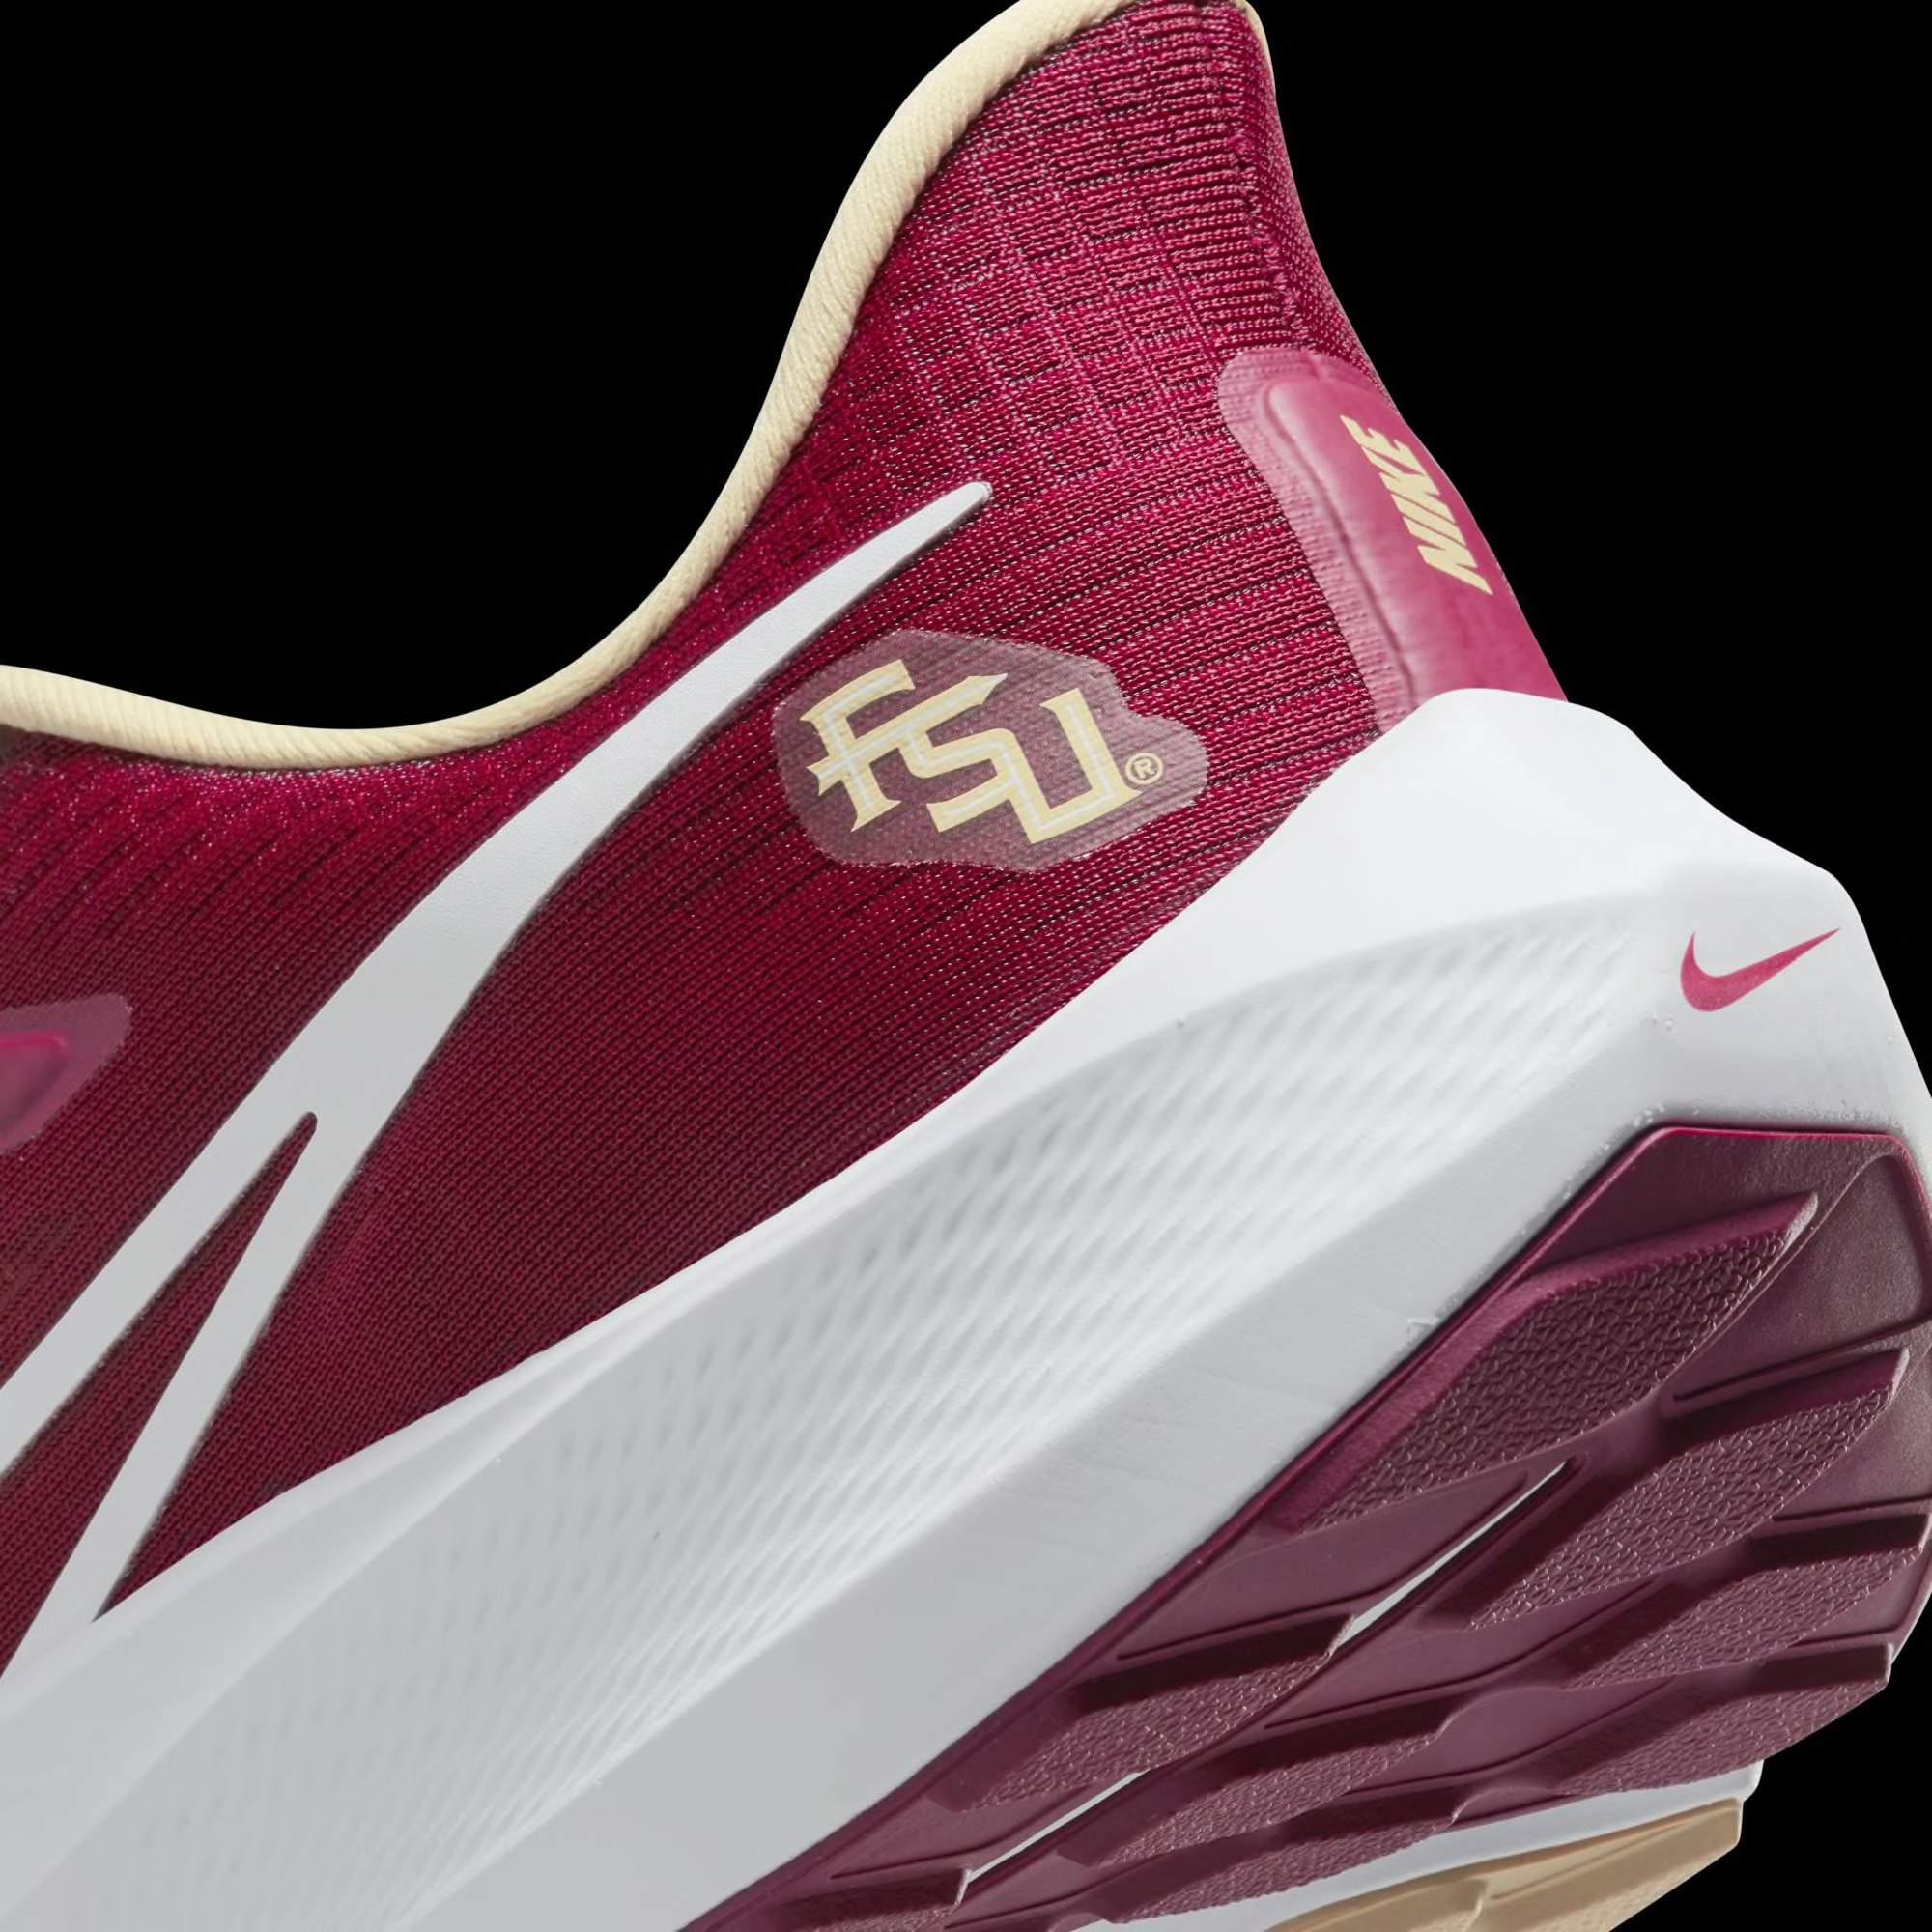 Florida State shoes